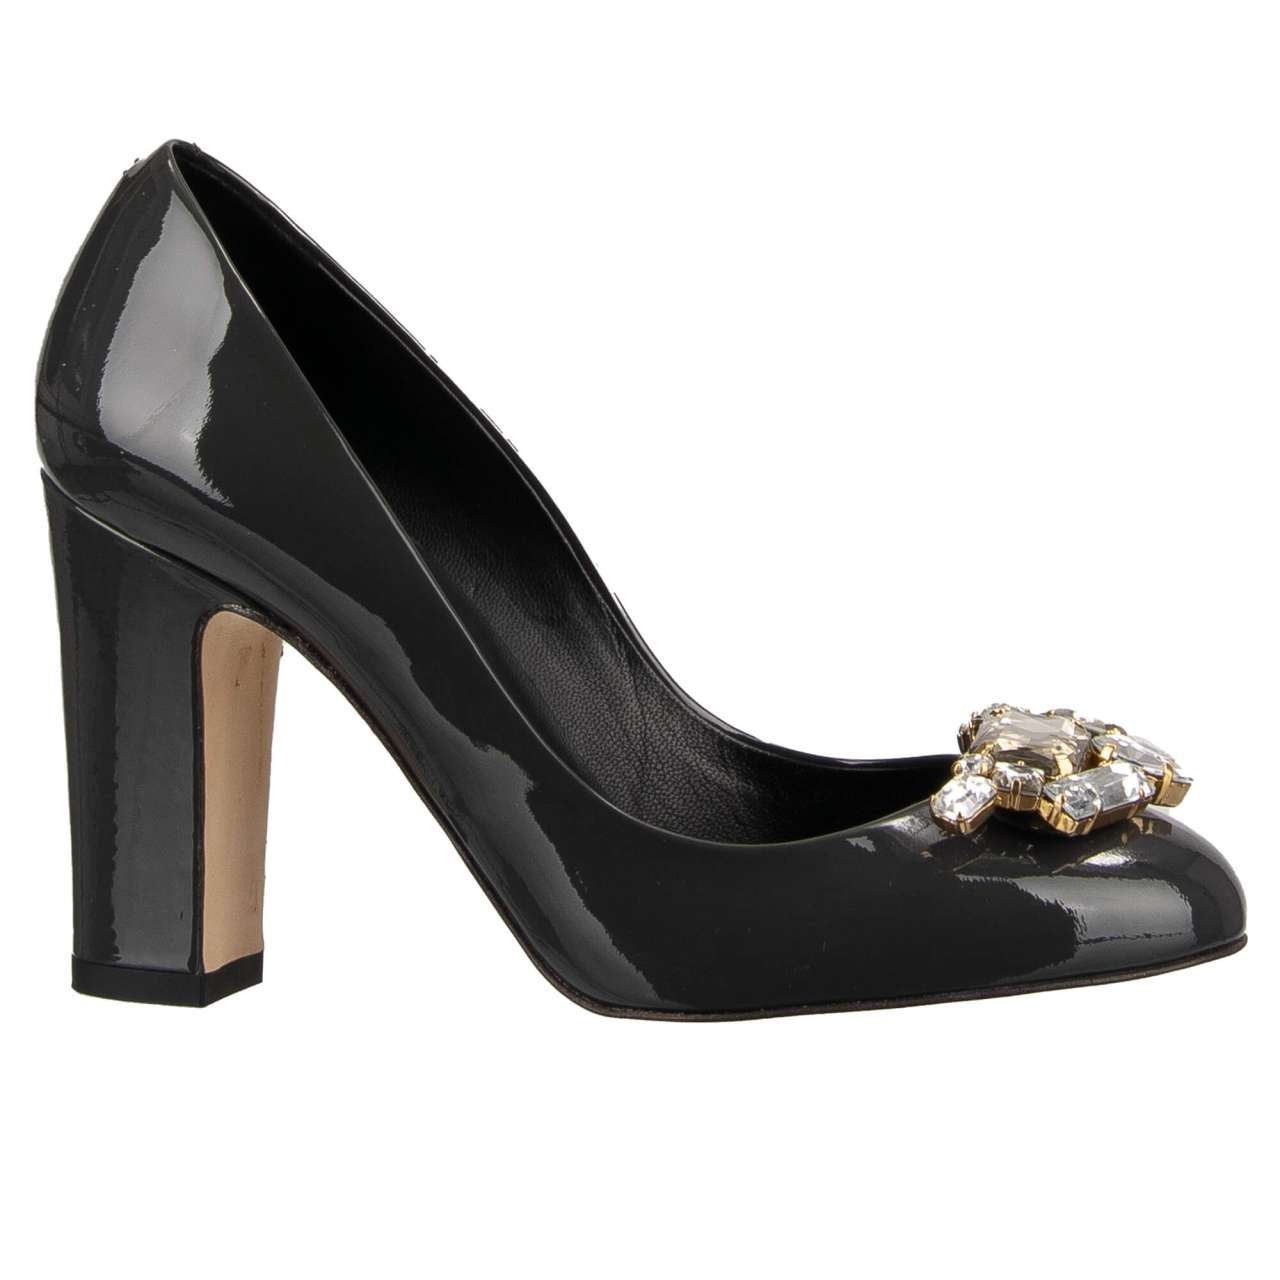 Dolce & Gabbana - Patent Leather Heels Pumps VALLY Crystal Brooch Grey 35 5 For Sale